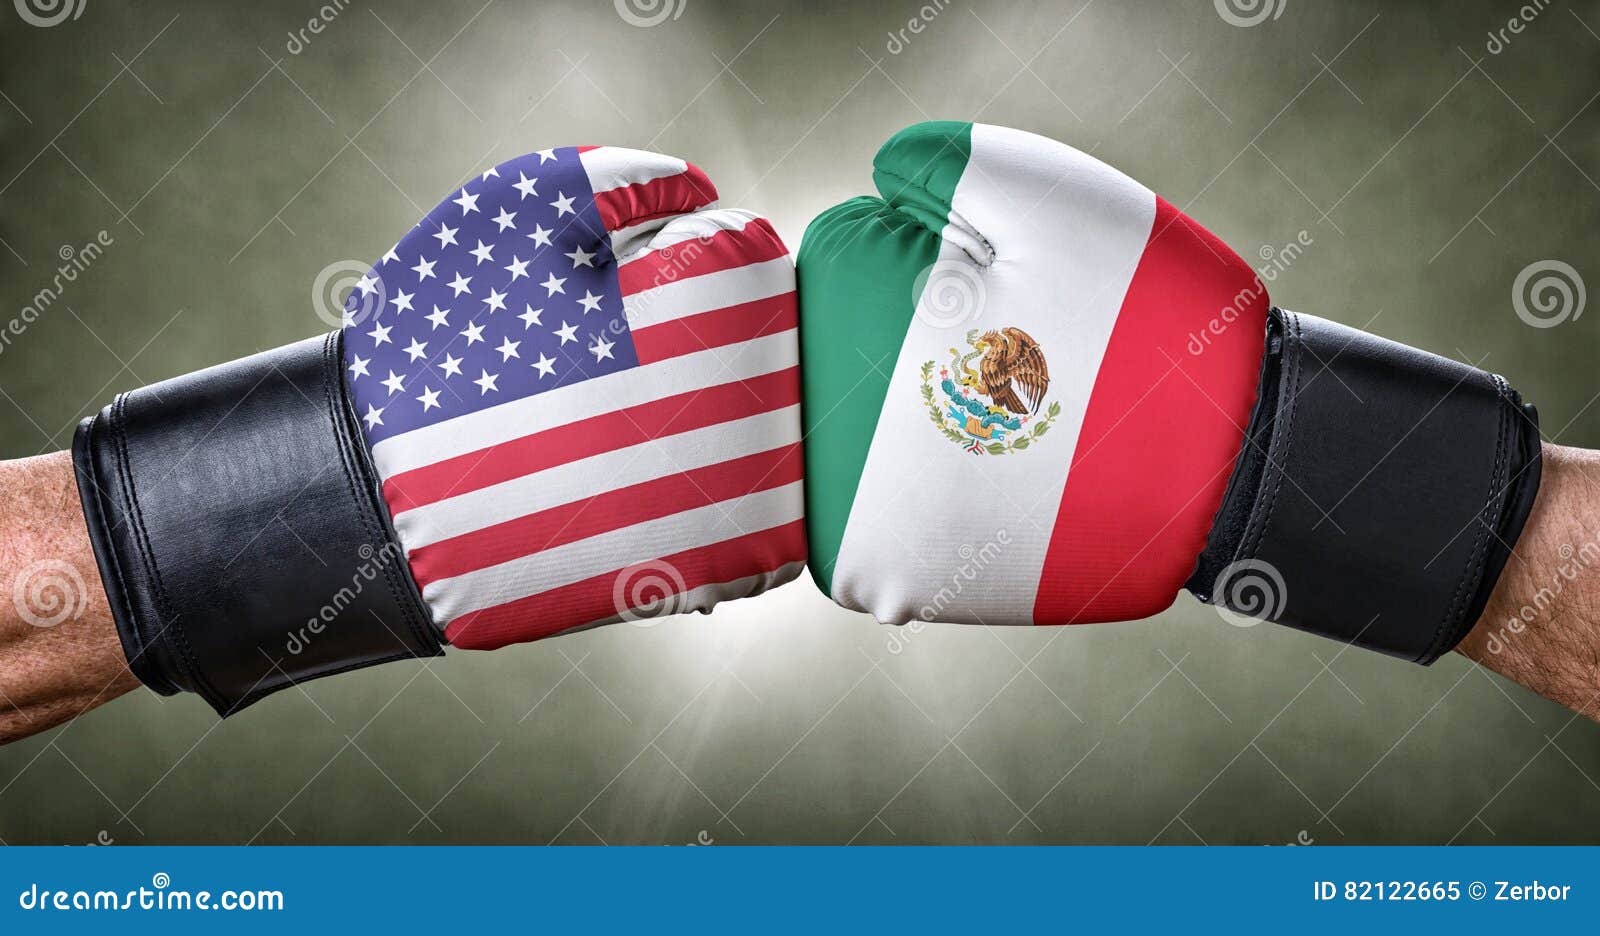 Boxing Match Between The USA And Mexico Stock Image - Image of foreign